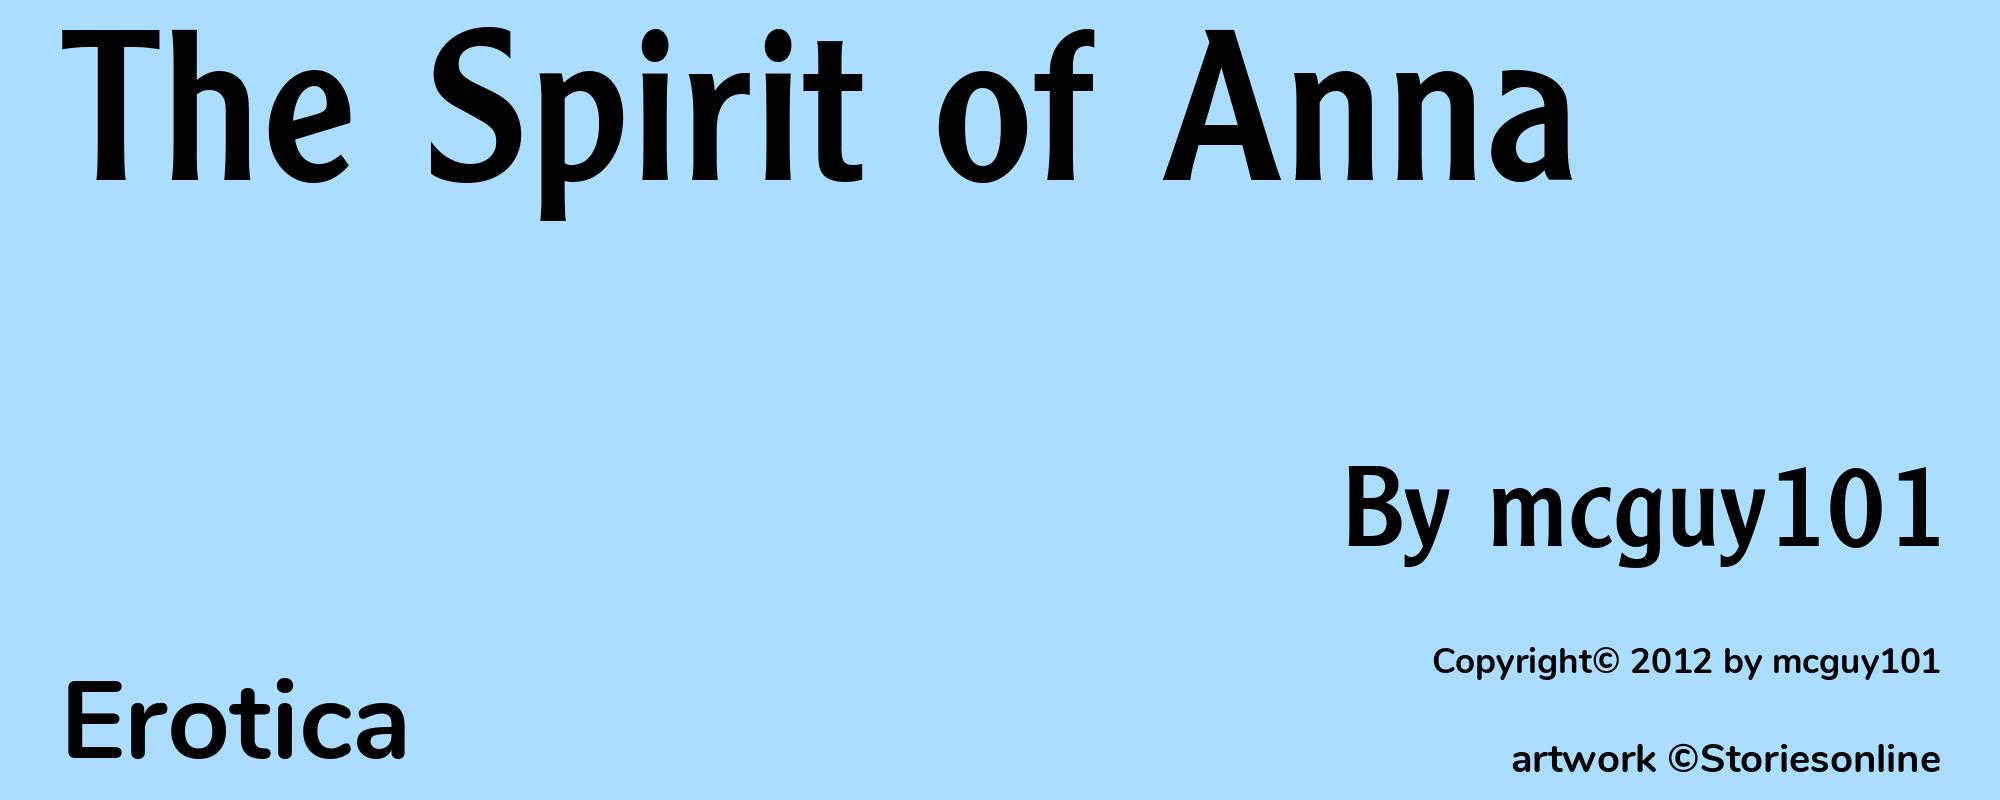 The Spirit of Anna - Cover